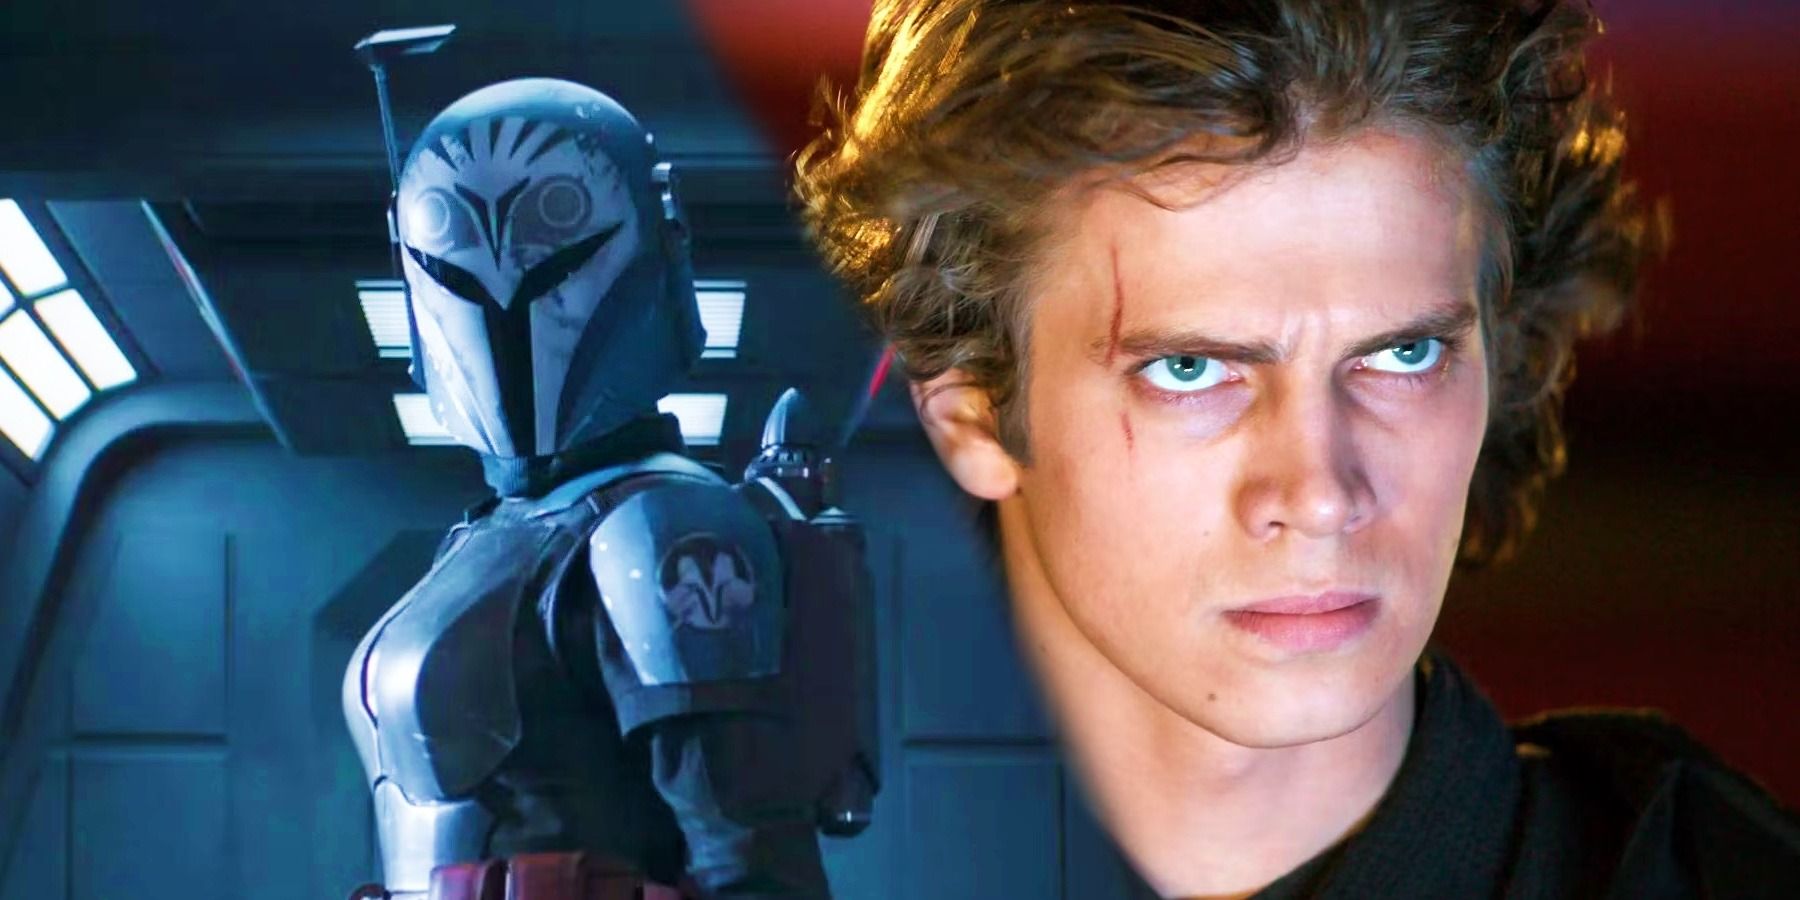 Bo-Katan in The Mandalorian season 3 to the left and Anakin in Revenge of the Sith to the right in a combined image 